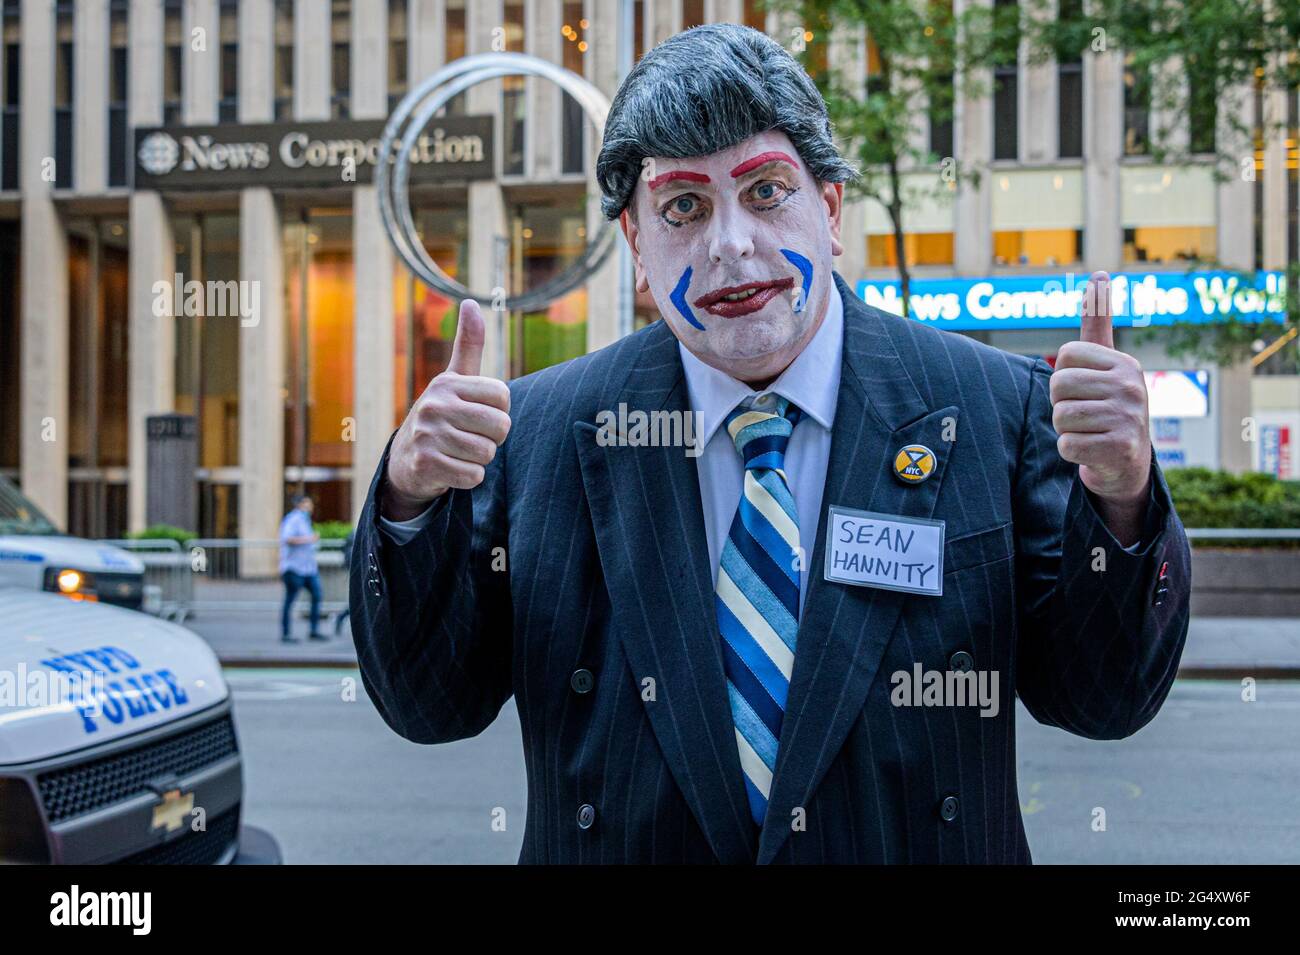 USA. 23rd June, 2021. A group of activists dressed as clowns held a street protest on June 23, 2021 outside Fox News Headquarters in Manhattan. In their opinion, Fox News has been treating our democracy like a circus, so they decided to bring the circus to their doorstep. (Photo by Erik McGregor/Sipa USA) Credit: Sipa USA/Alamy Live News Stock Photo